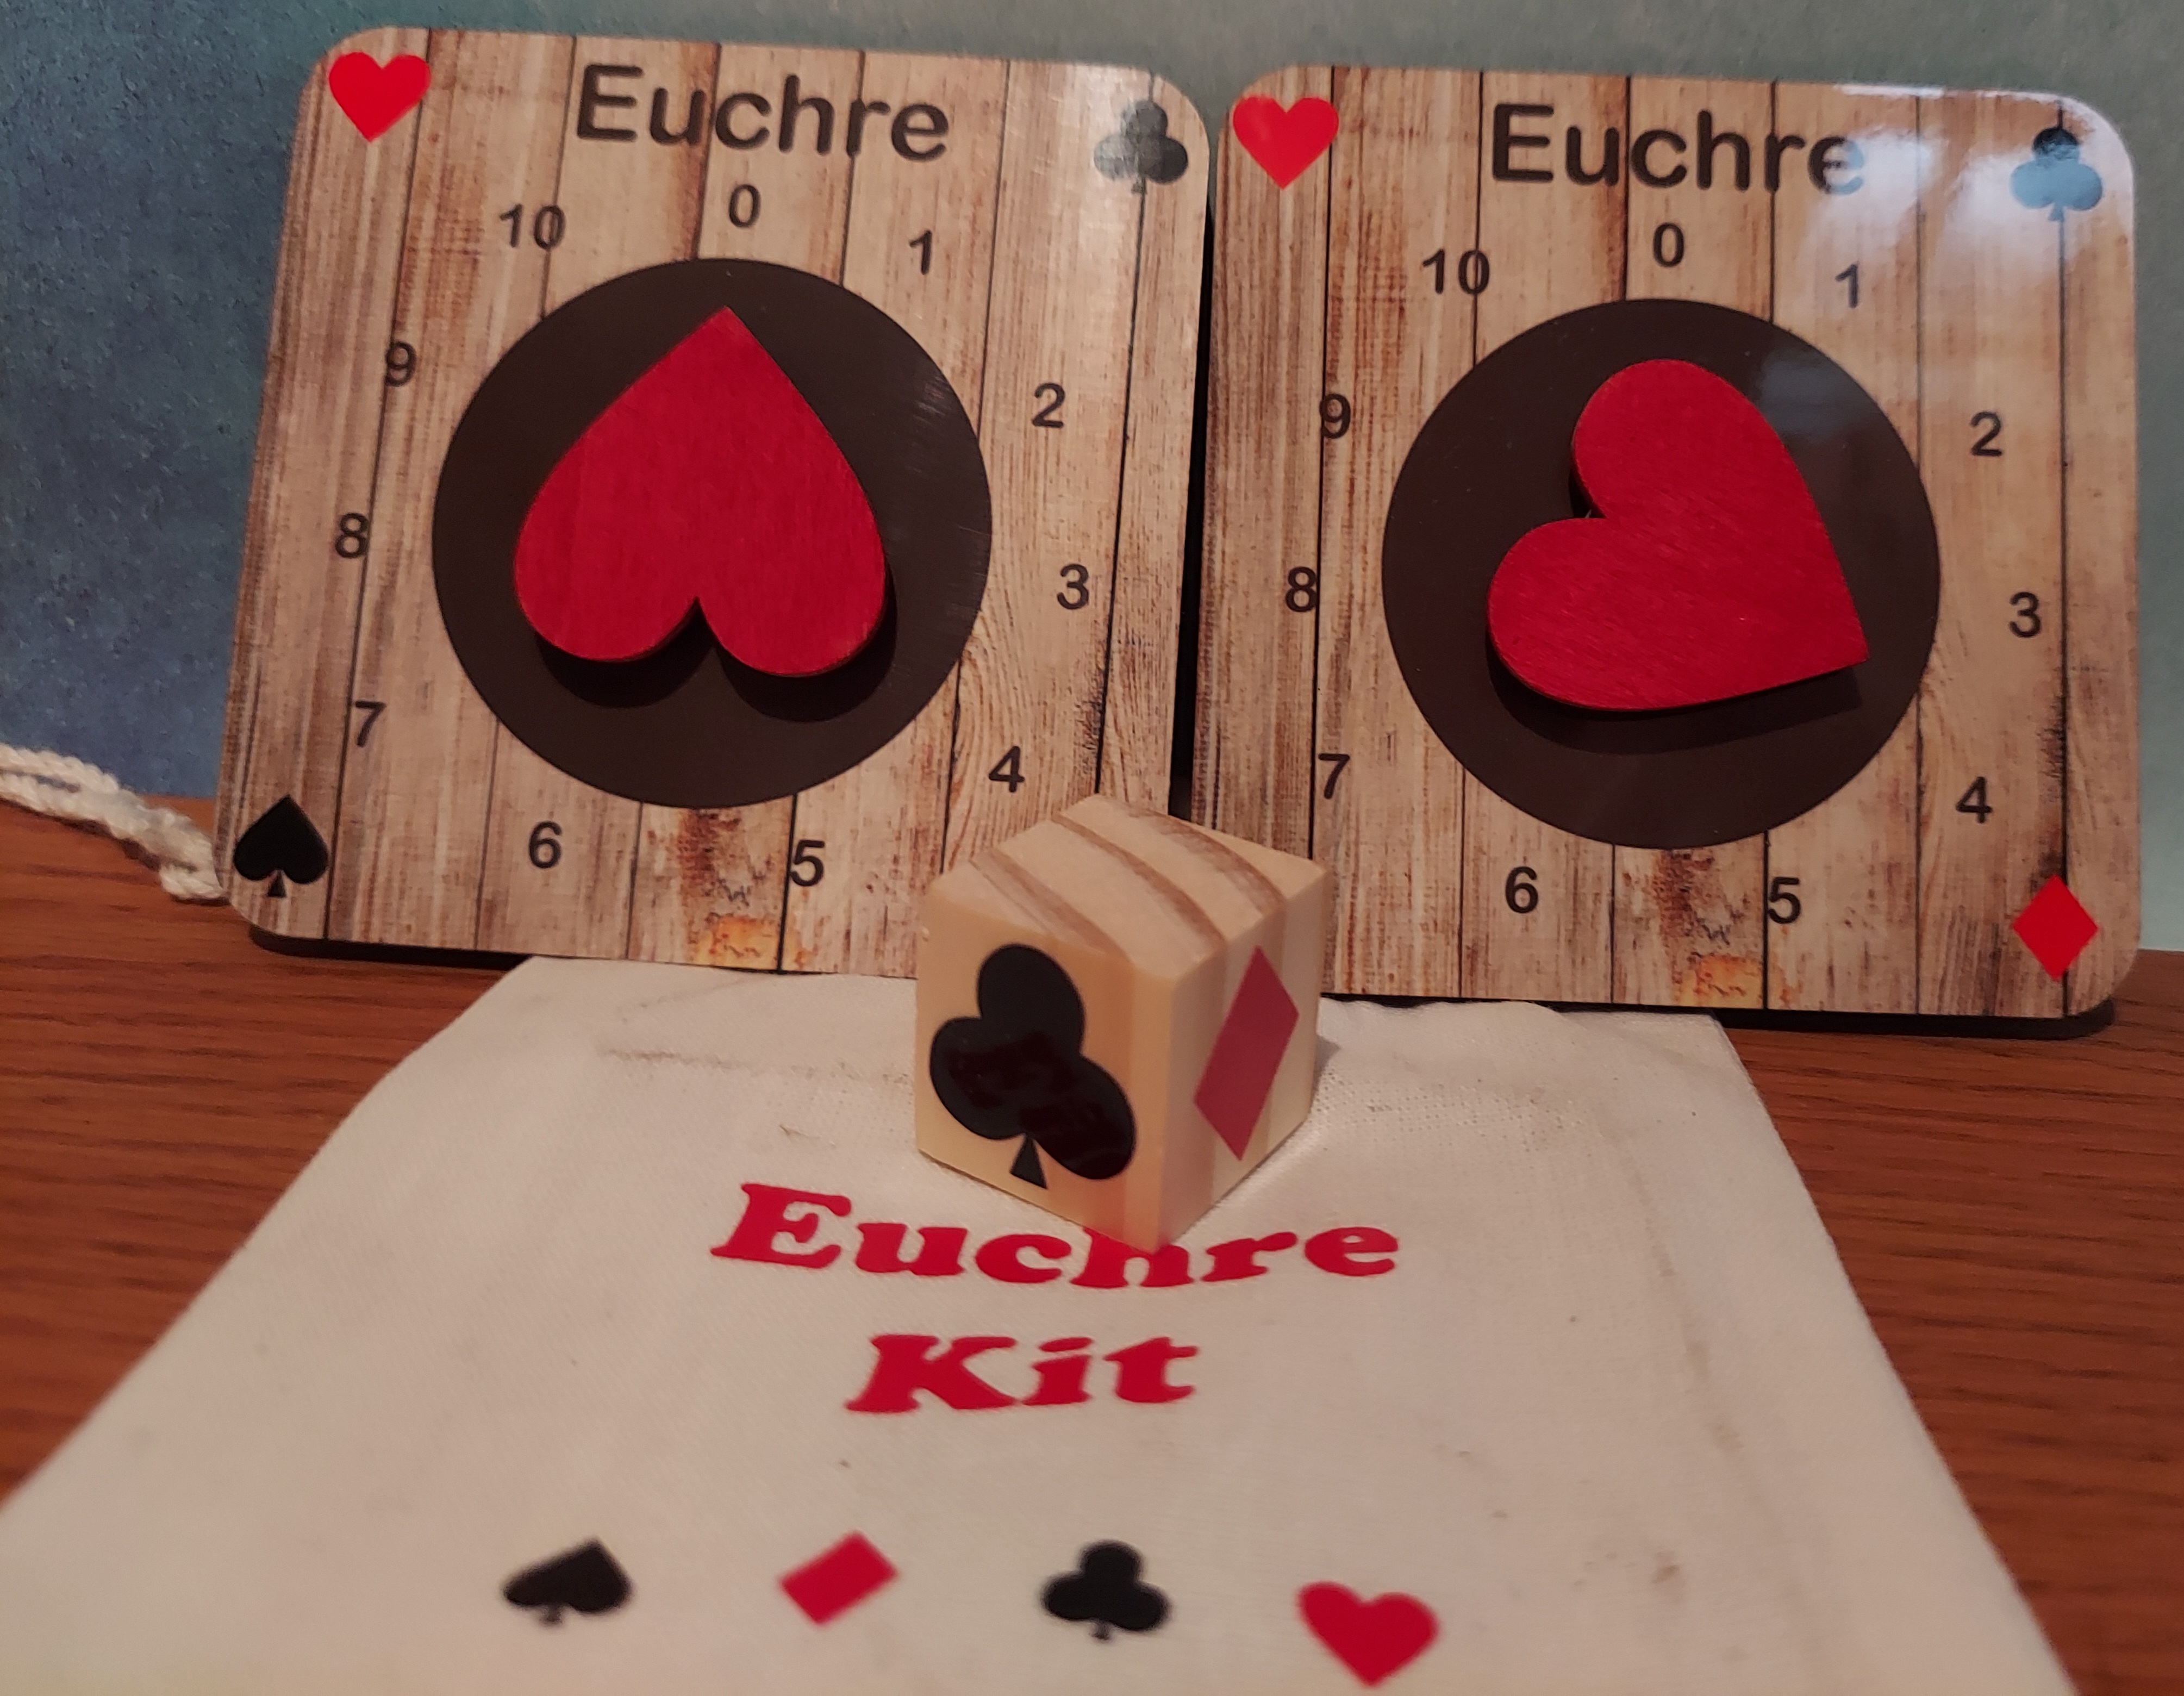 Euchre scorecards made with sublimation printing